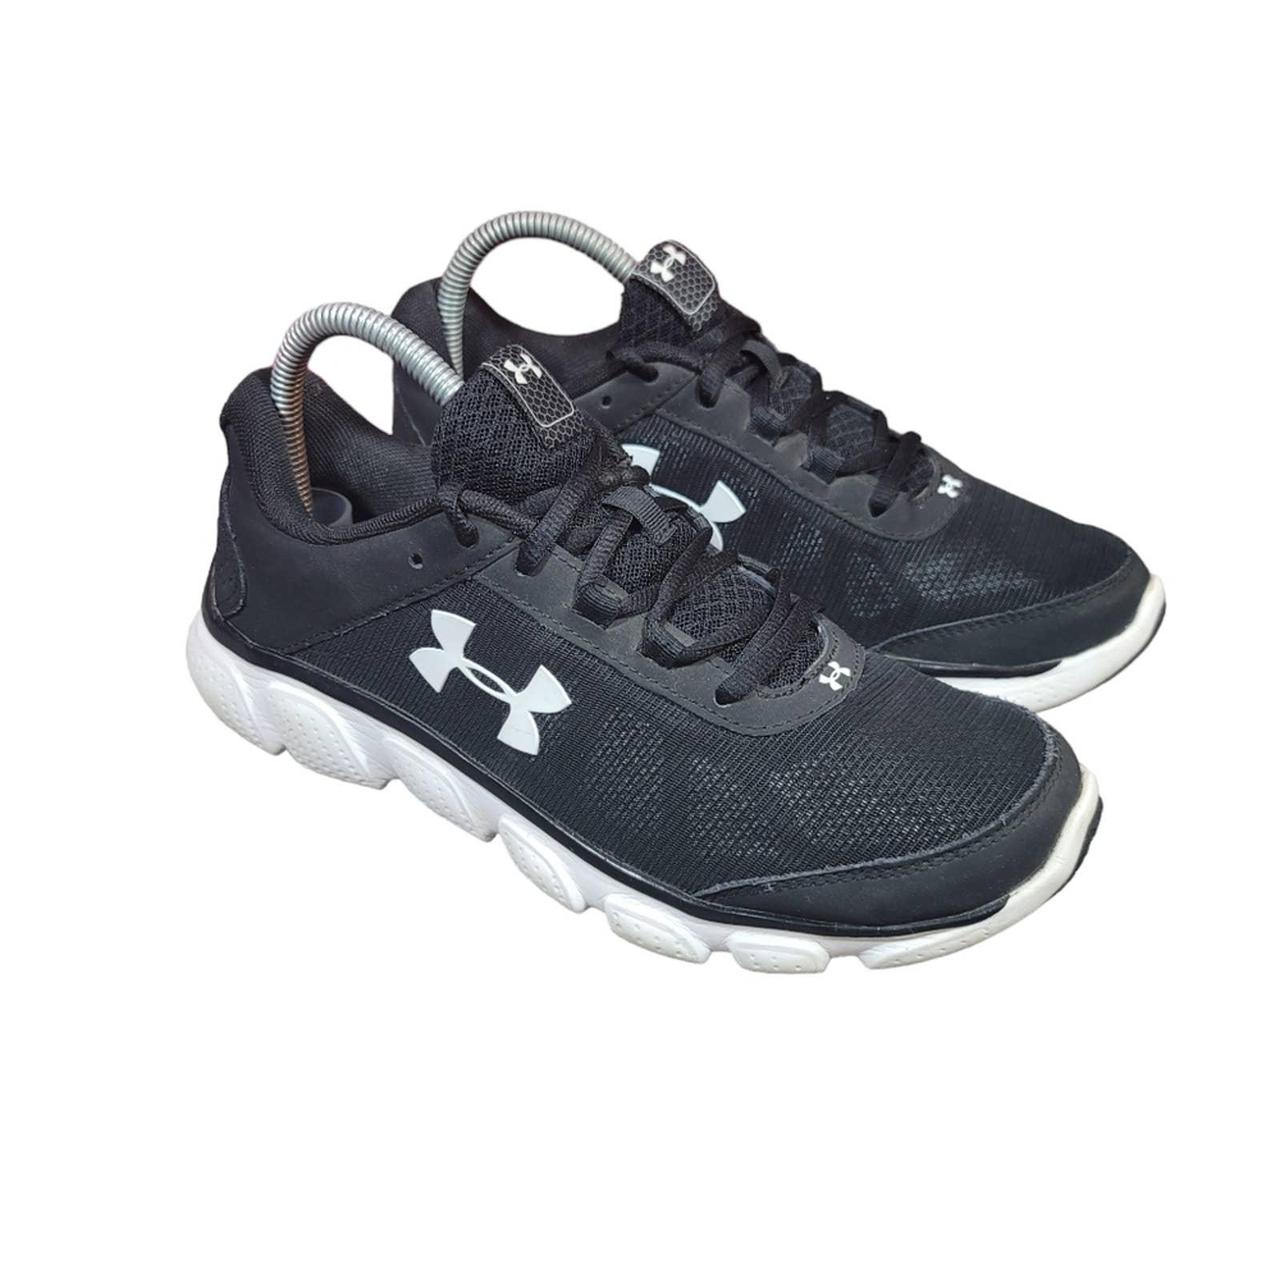 Under Armour Micro G Assert 7 black and white - Depop